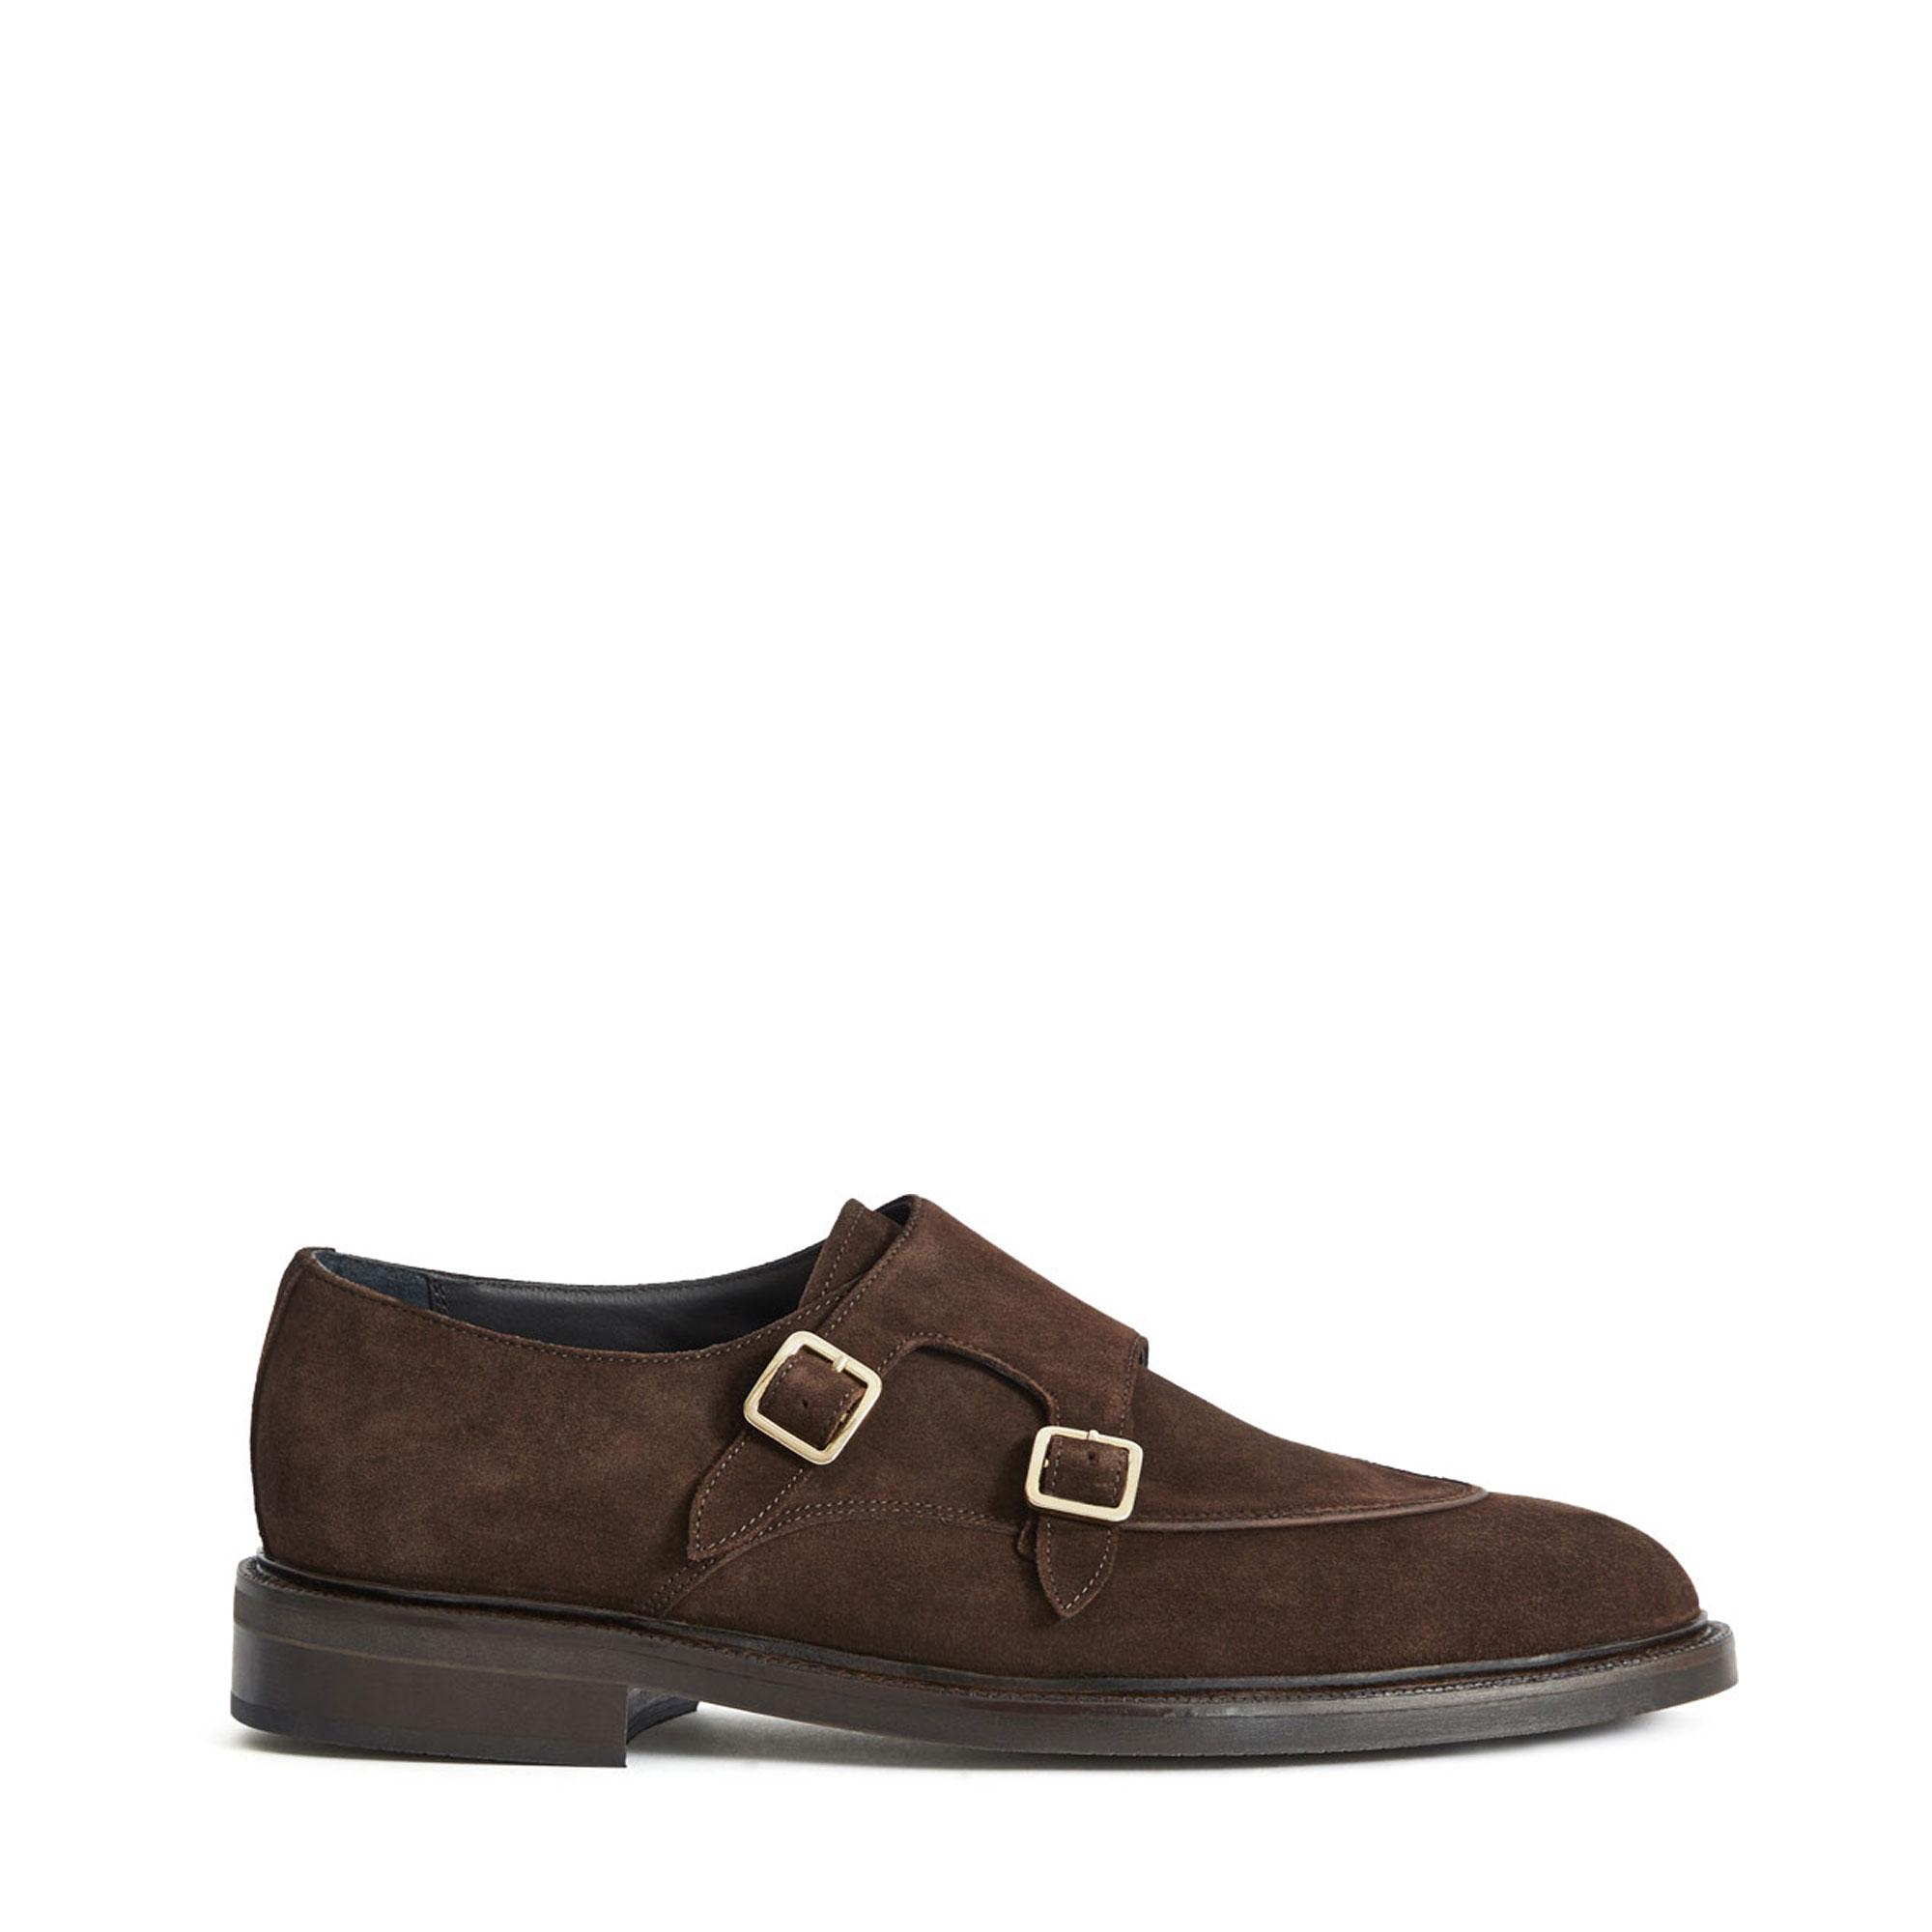 Jake Suede Monk Shoes